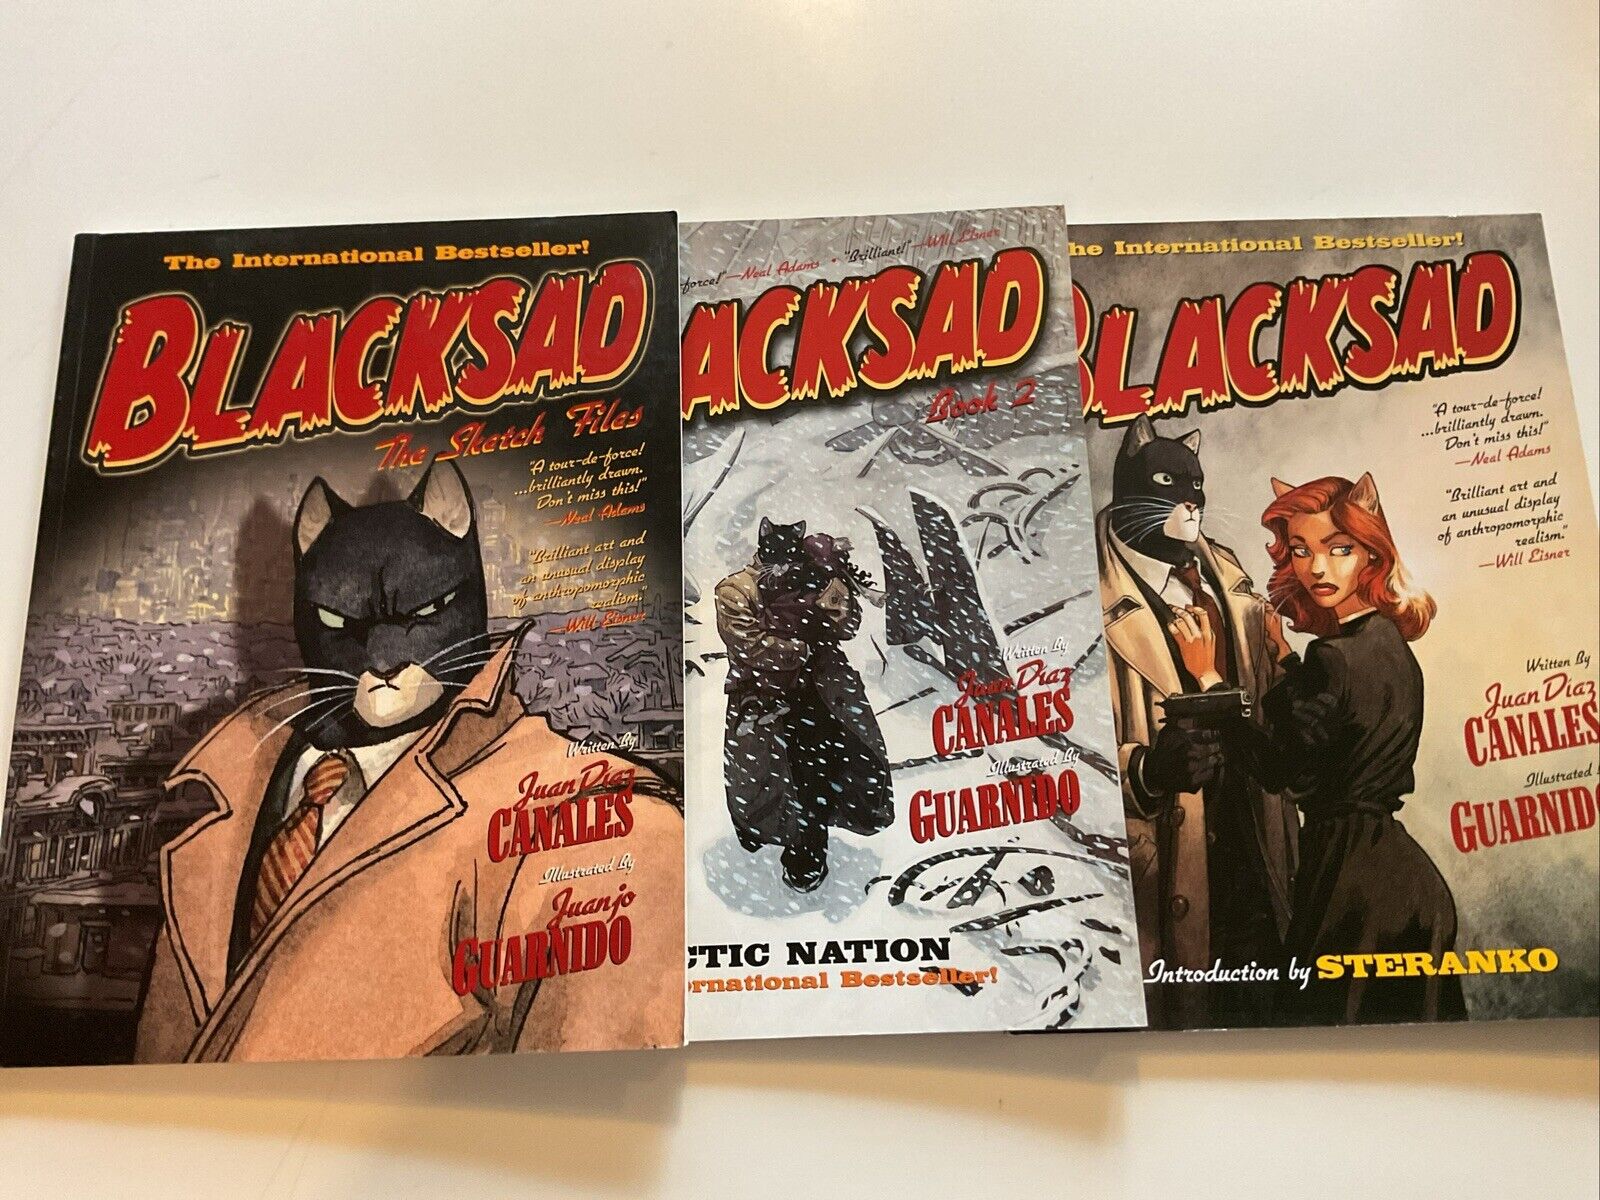 LOT OF 3 BLACKSAD—including RARE THE SKETCH FILES By Juan Diaz Canales EXCELLENT